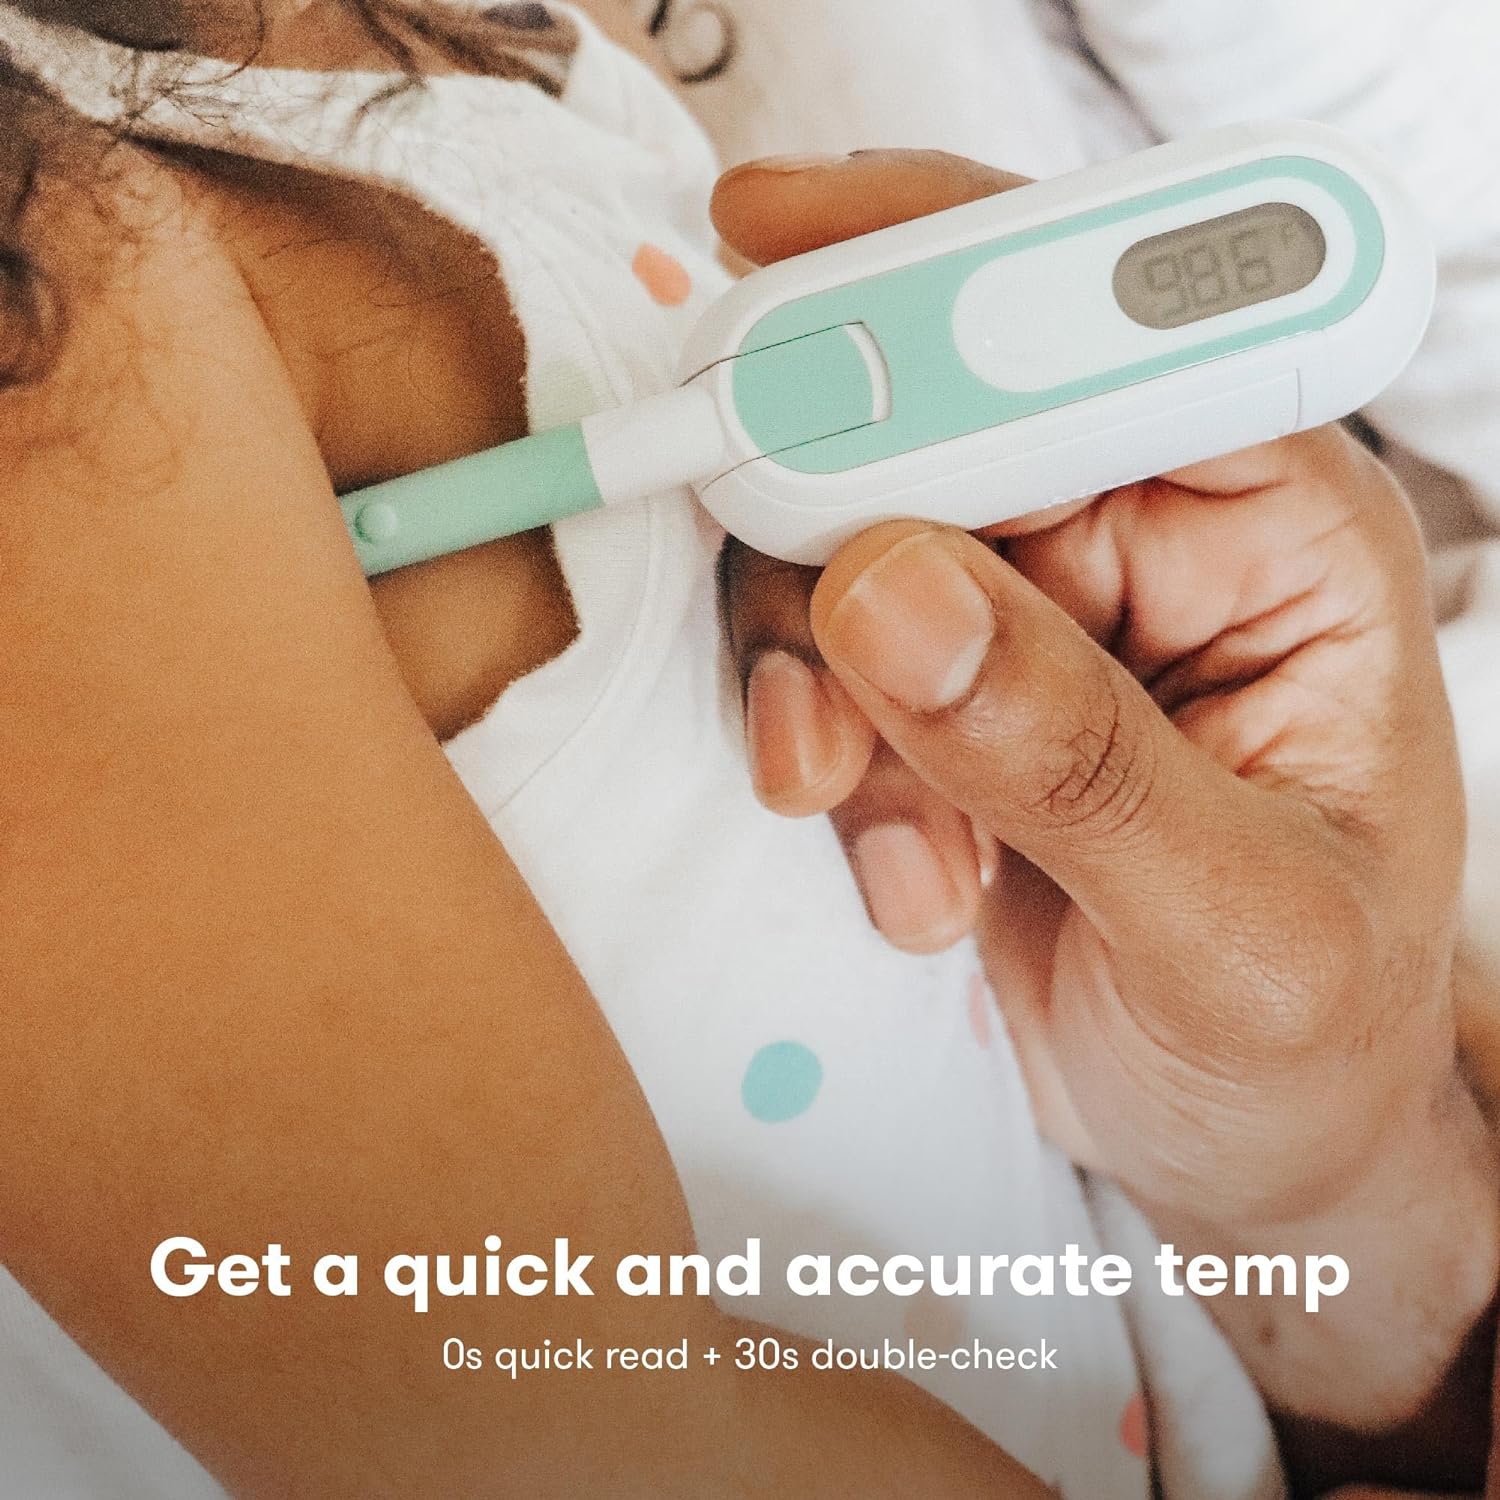 FridaBaby 3-in-1 True Temp Digital Thermometer for Fevers, Babies & Kids (Rectal, Underarm + Oral) : Baby